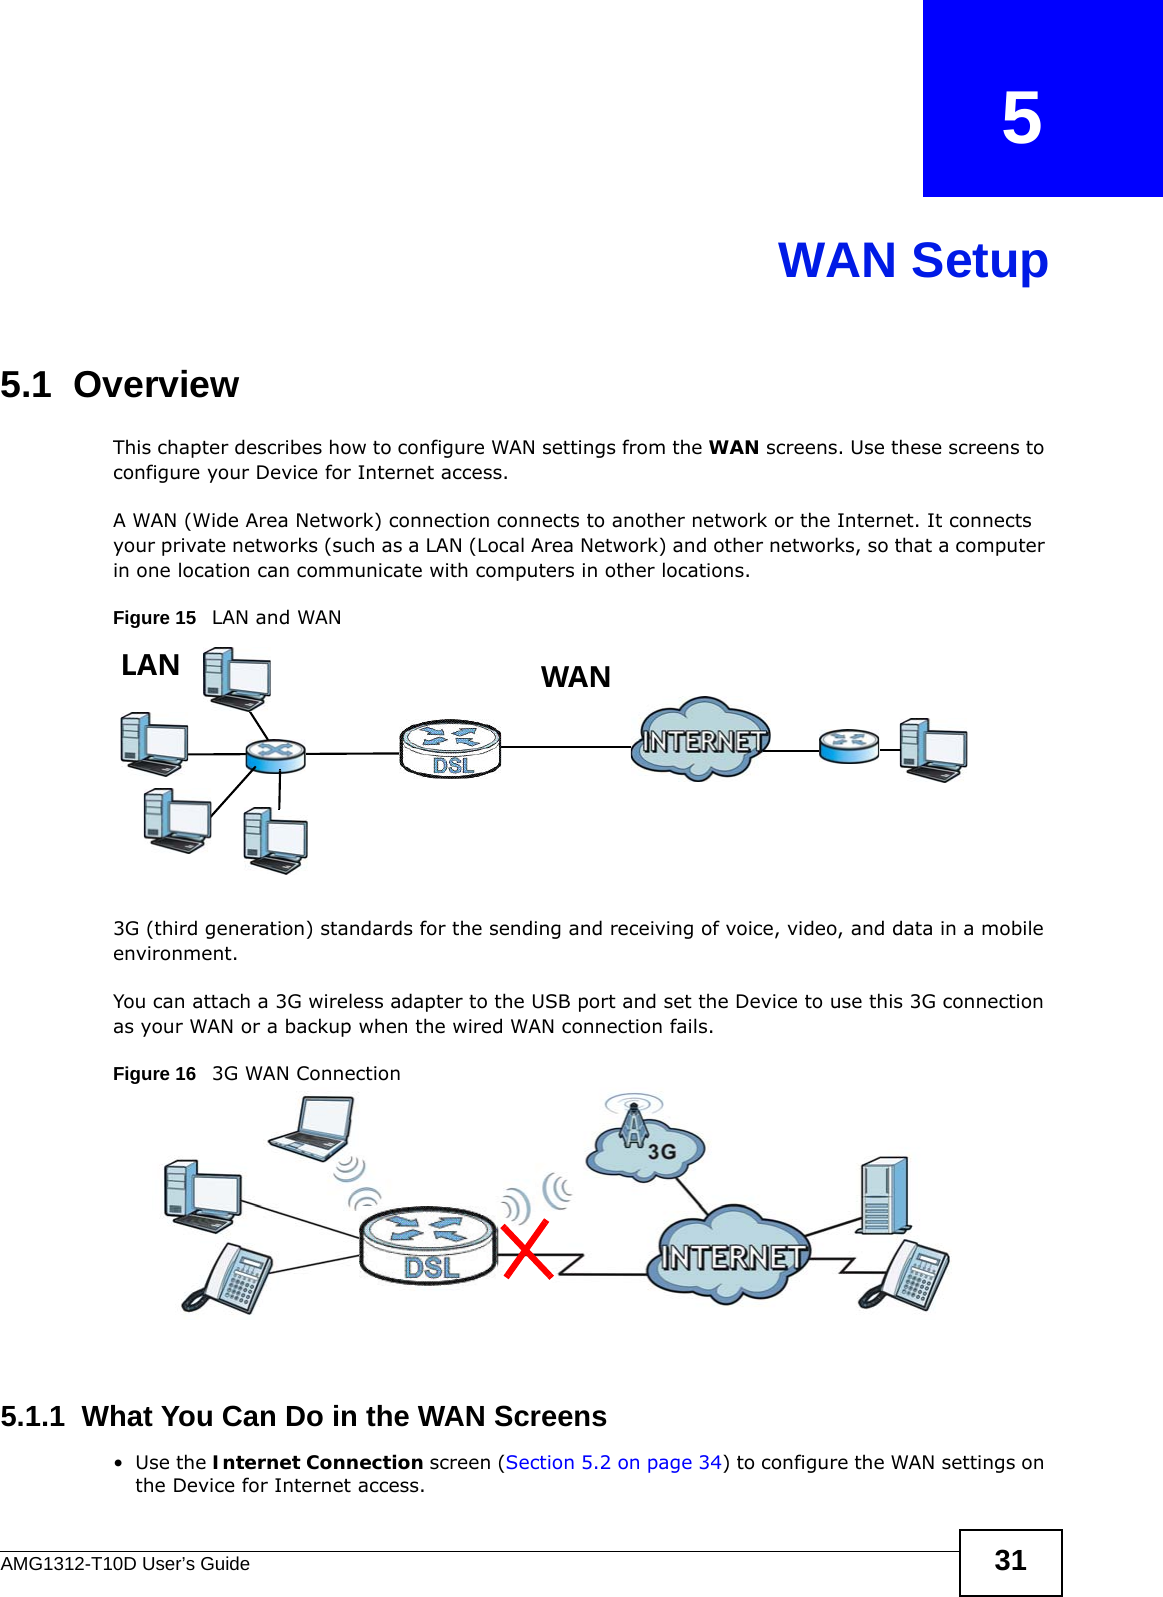 AMG1312-T10D User’s Guide 31CHAPTER   5WAN Setup5.1  OverviewThis chapter describes how to configure WAN settings from the WAN screens. Use these screens to configure your Device for Internet access.A WAN (Wide Area Network) connection connects to another network or the Internet. It connects your private networks (such as a LAN (Local Area Network) and other networks, so that a computer in one location can communicate with computers in other locations.Figure 15   LAN and WAN3G (third generation) standards for the sending and receiving of voice, video, and data in a mobile environment. You can attach a 3G wireless adapter to the USB port and set the Device to use this 3G connection as your WAN or a backup when the wired WAN connection fails.Figure 16   3G WAN Connection 5.1.1  What You Can Do in the WAN Screens•Use the Internet Connection screen (Section 5.2 on page 34) to configure the WAN settings on the Device for Internet access.WANLAN